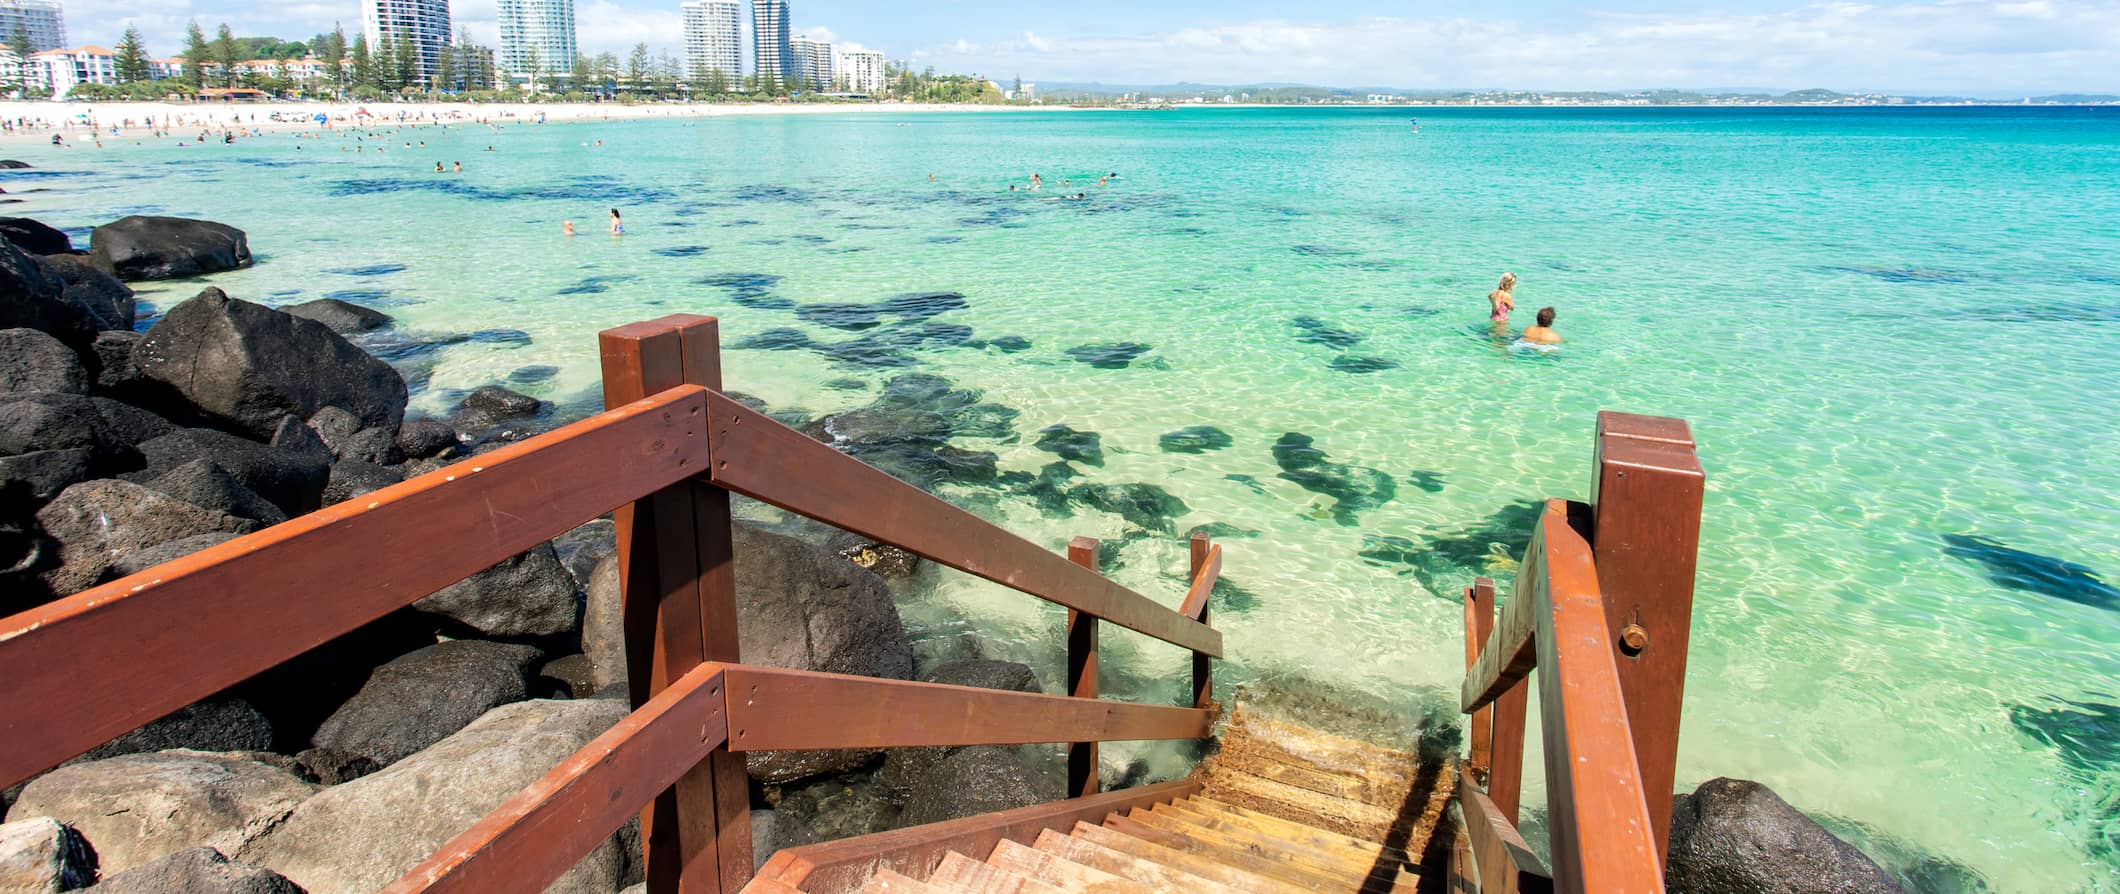 People swimming in the clear waters of Gold Coast, Australia near a small wooden staircase with the city in the background